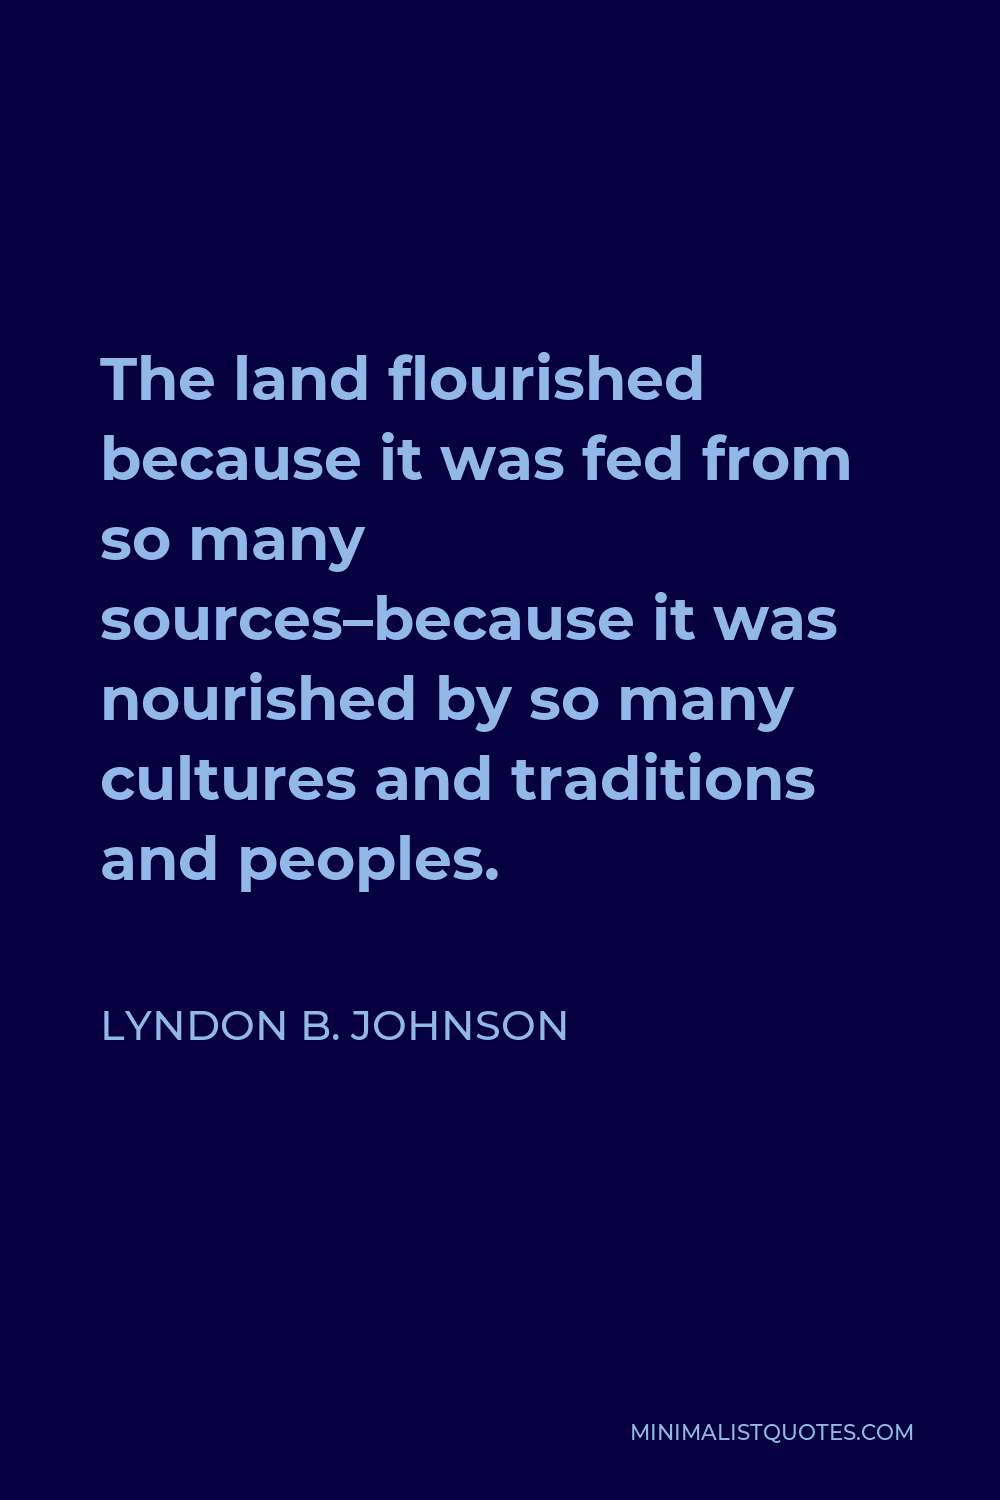 Lyndon B. Johnson Quote - The land flourished because it was fed from so many sources–because it was nourished by so many cultures and traditions and peoples.